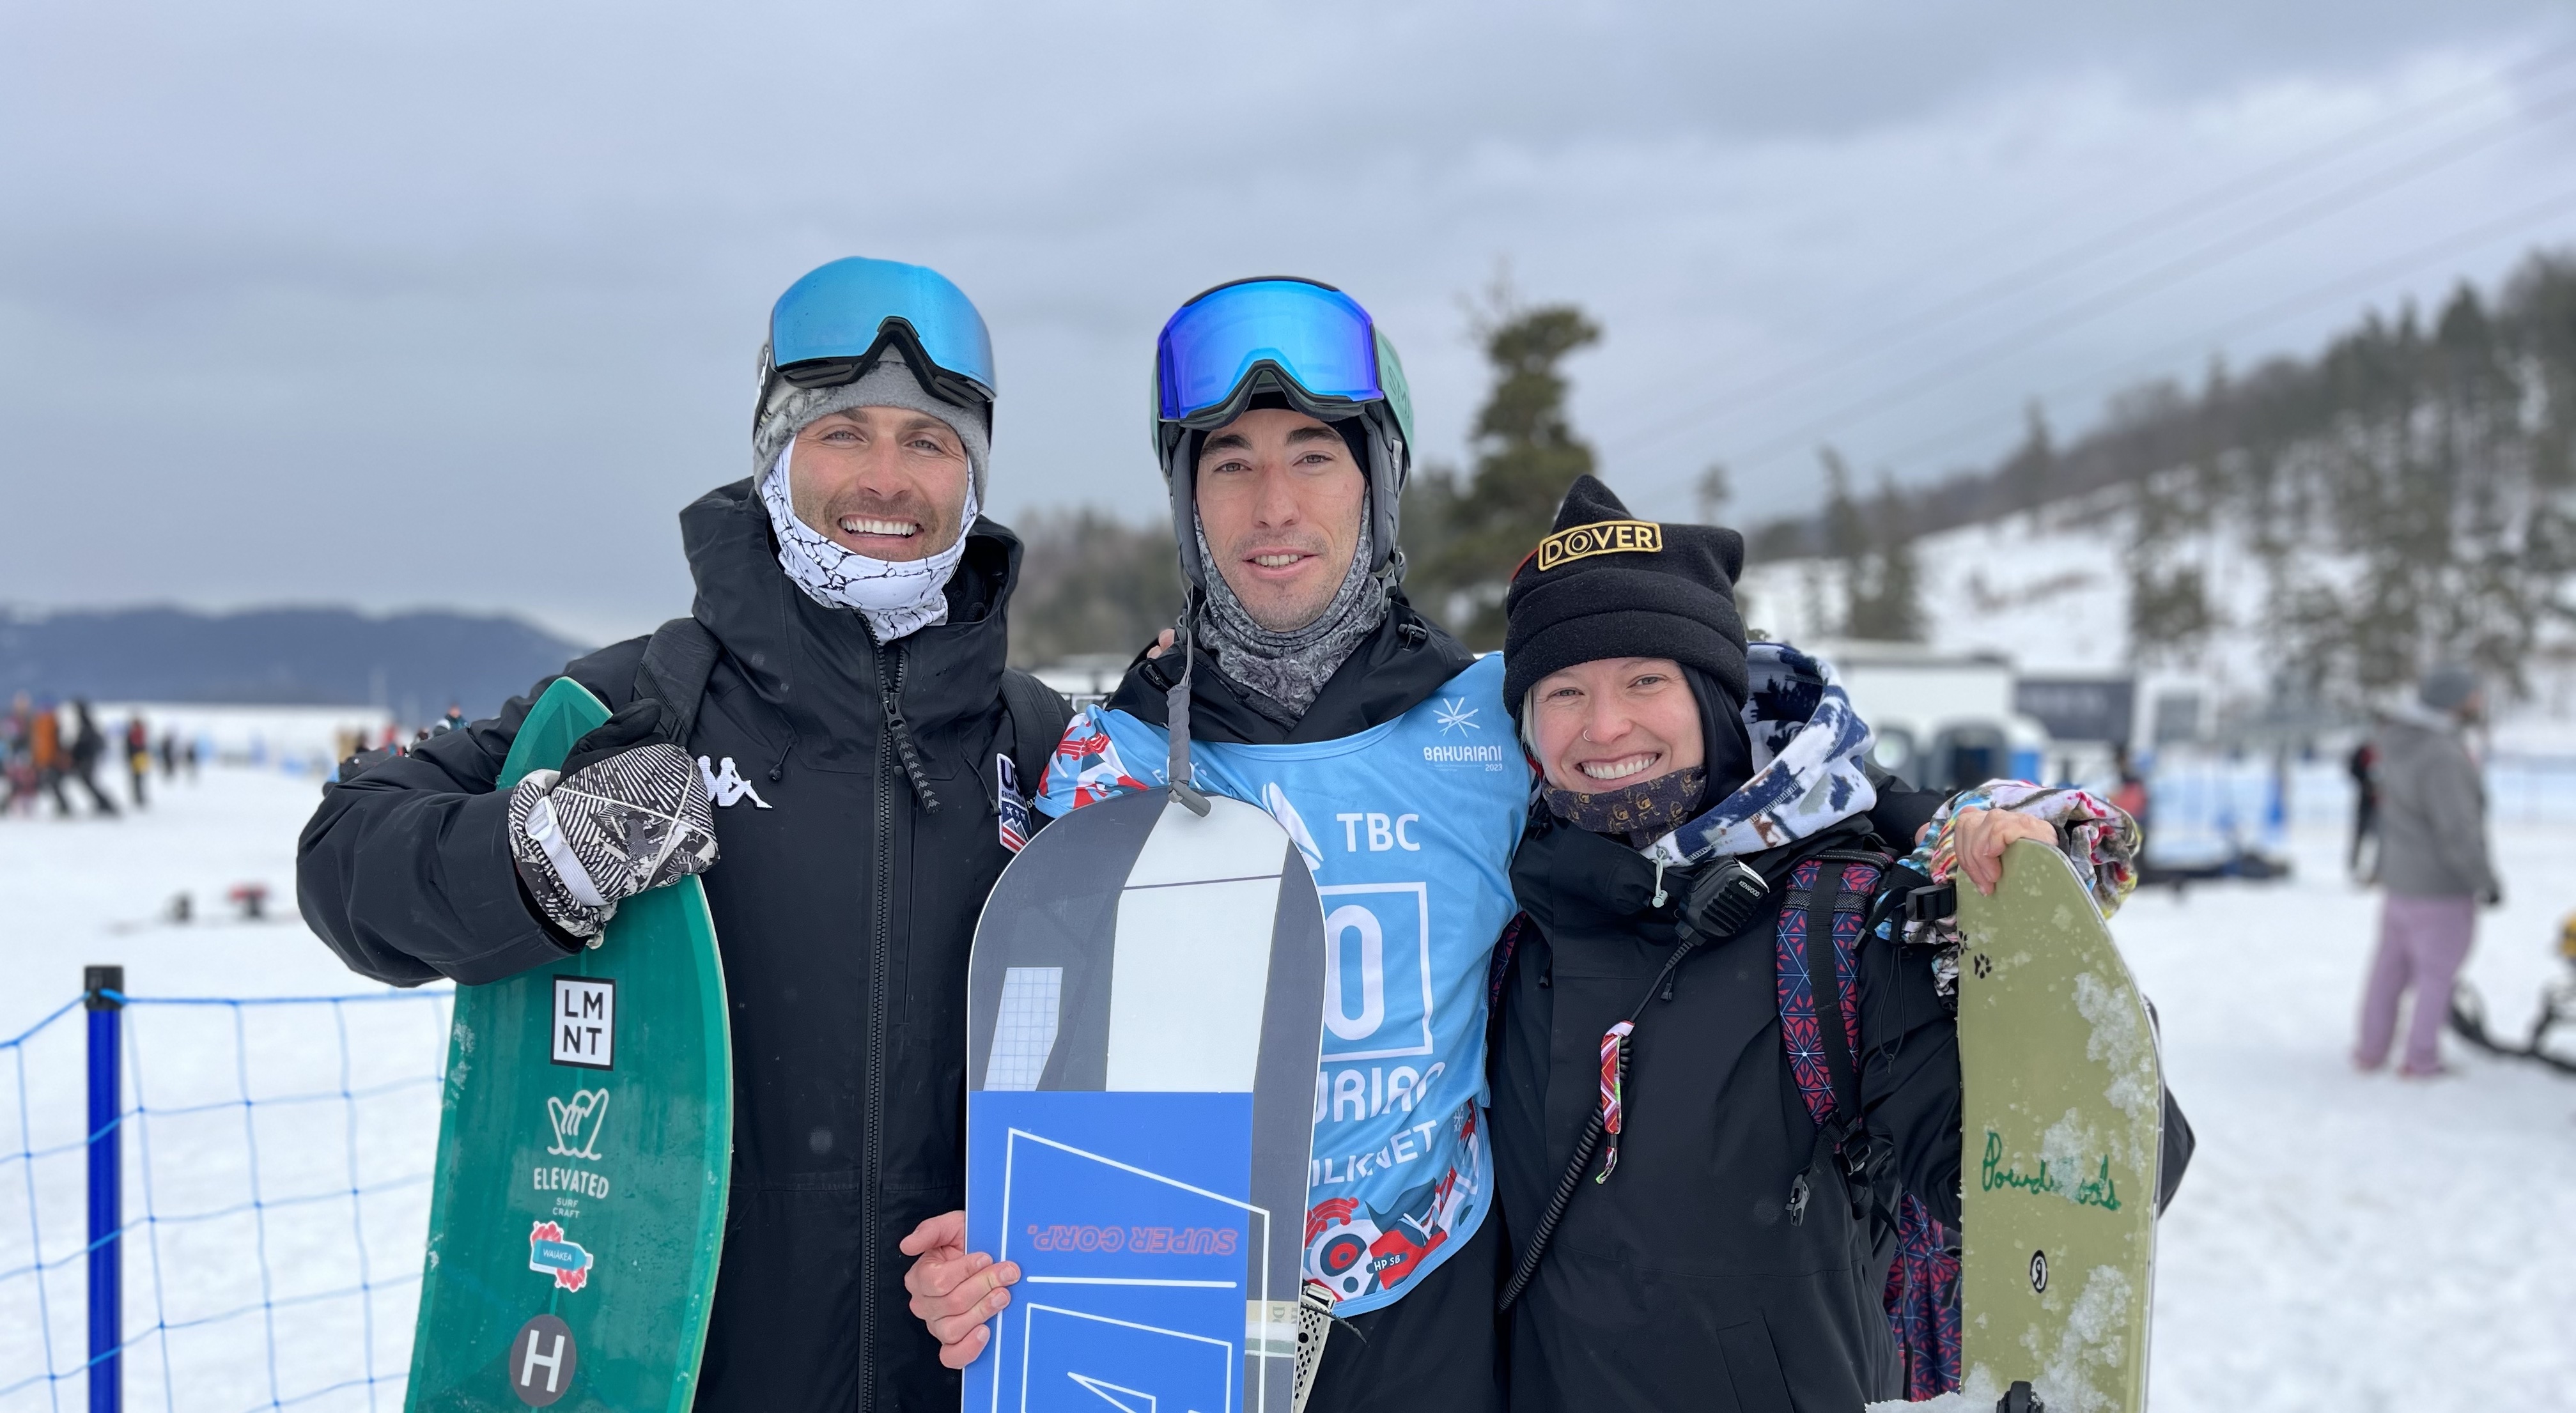 Chase Josey and coaches after halfpipe finals